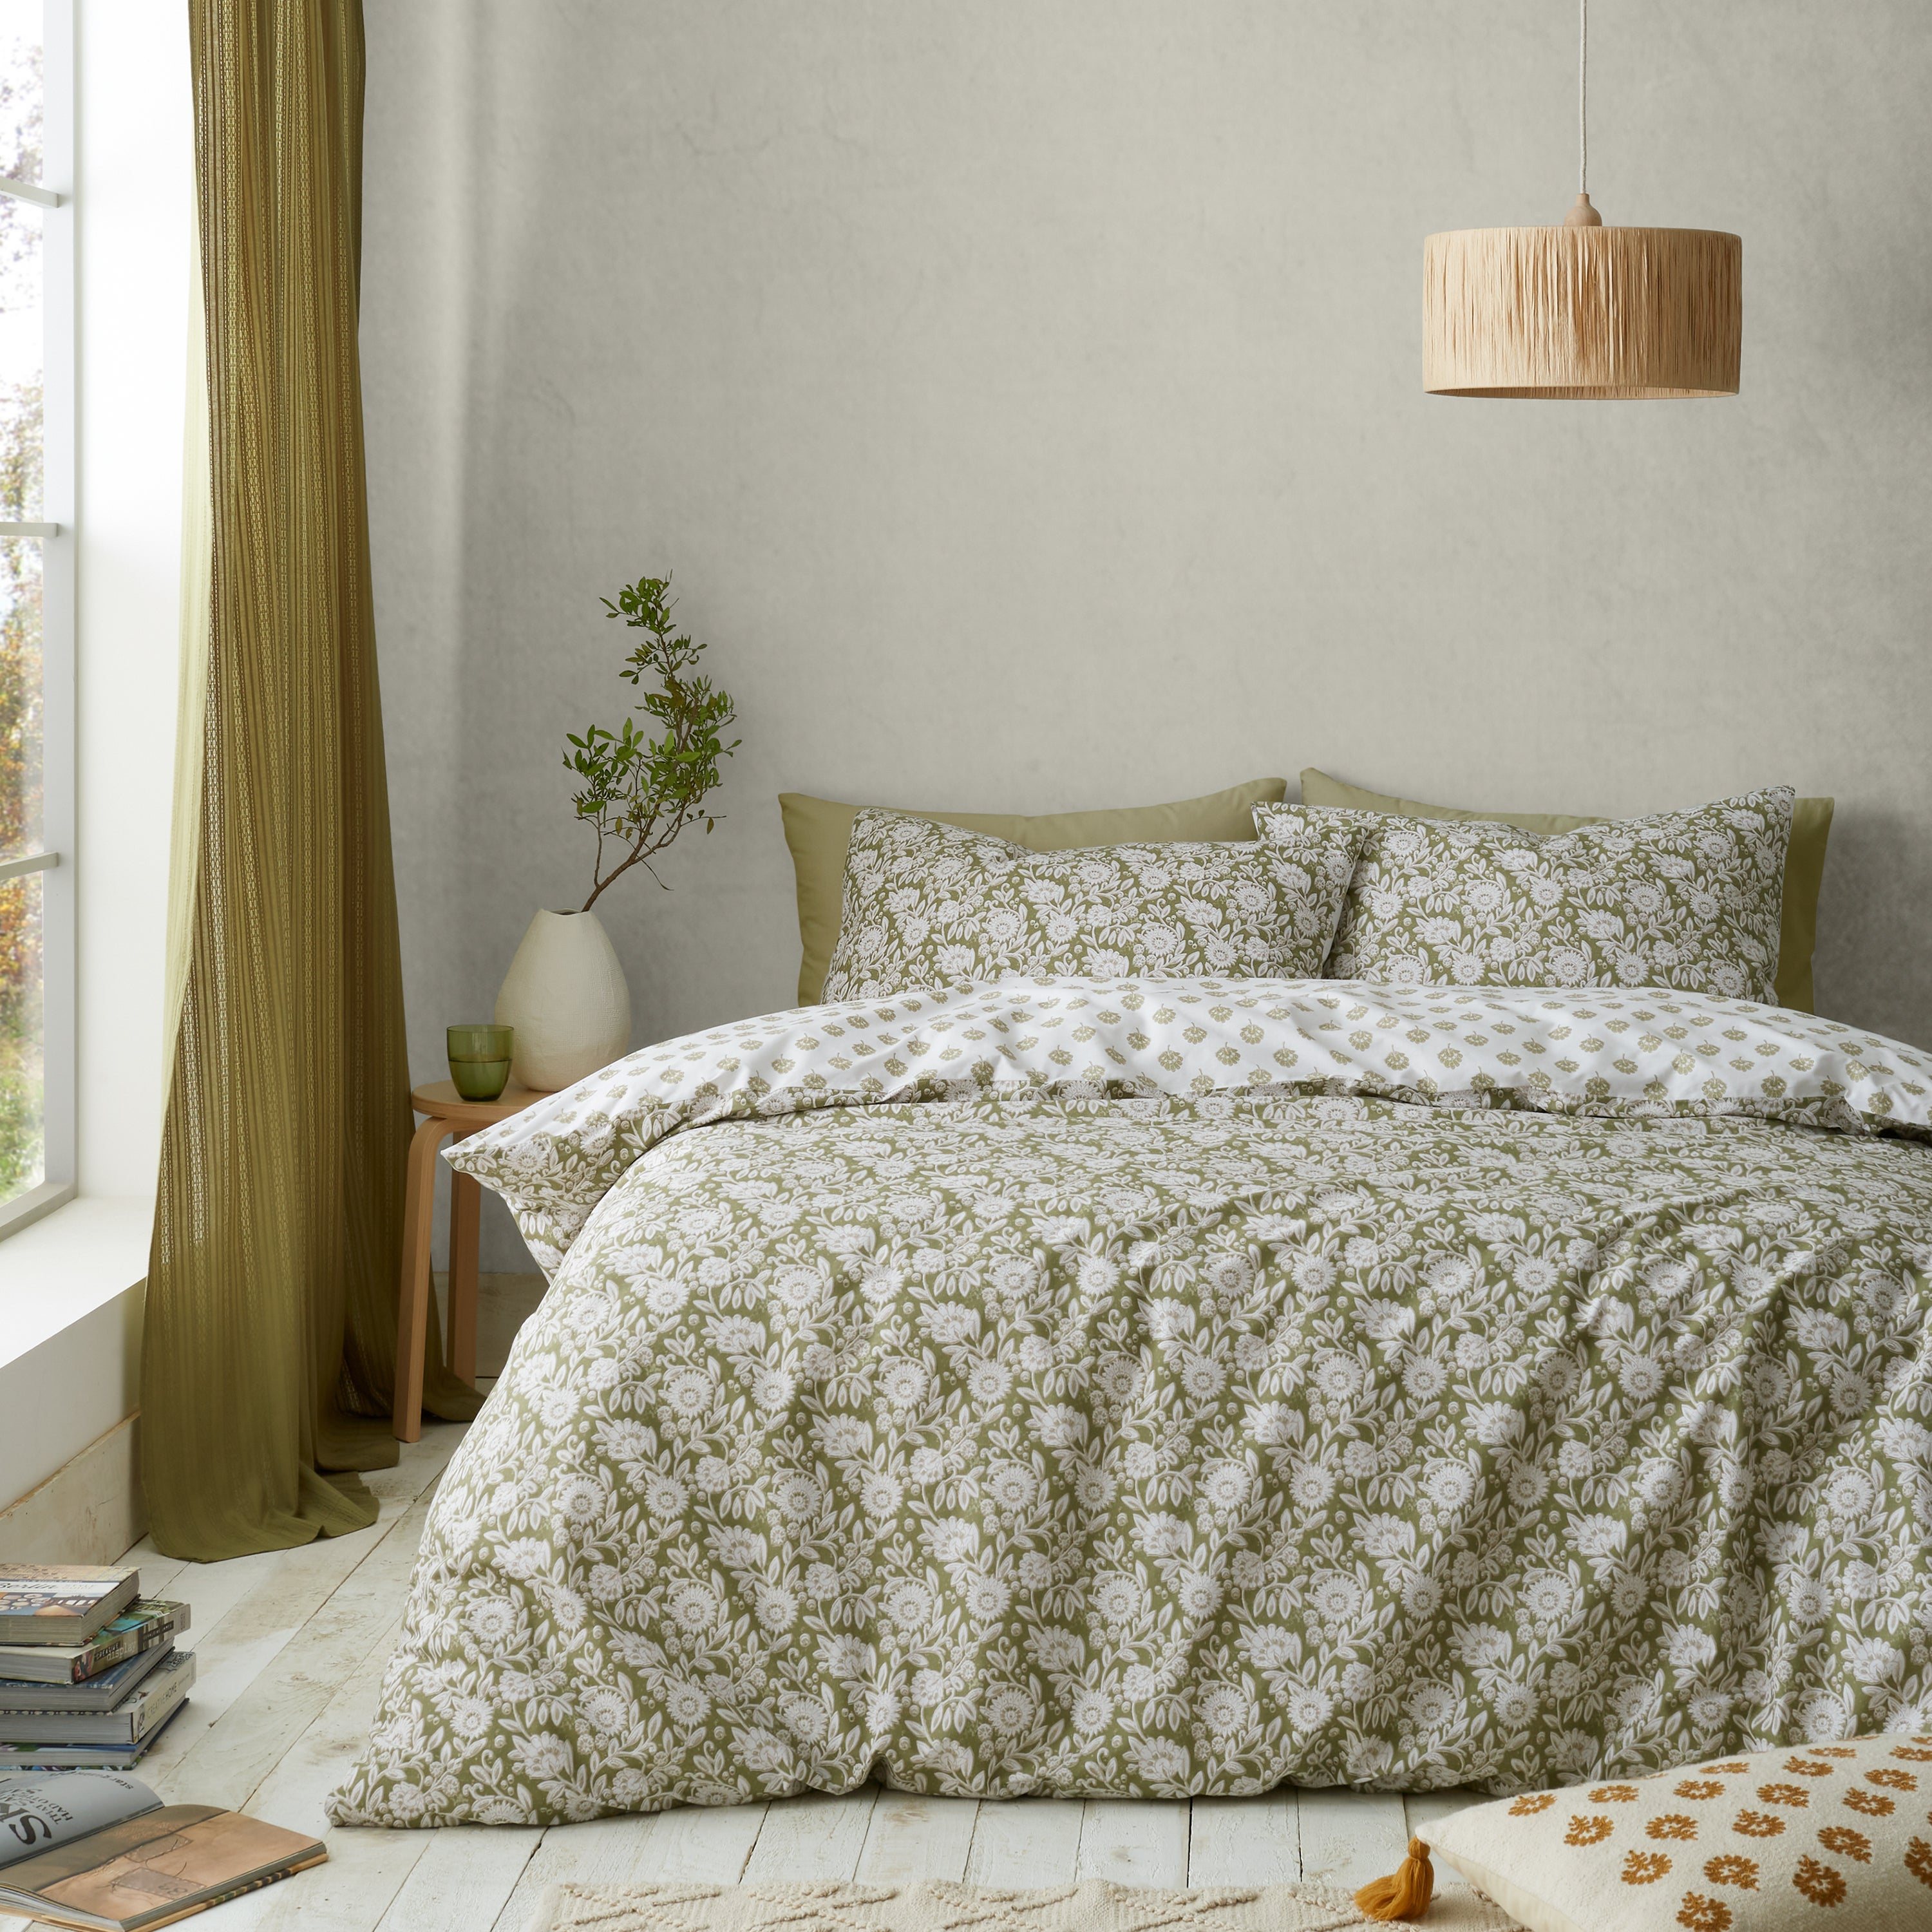 Photos - Bed Linen Elephant Pineapple  Tangier Floral Olive Green Duvet Cover and Pillowcase S 